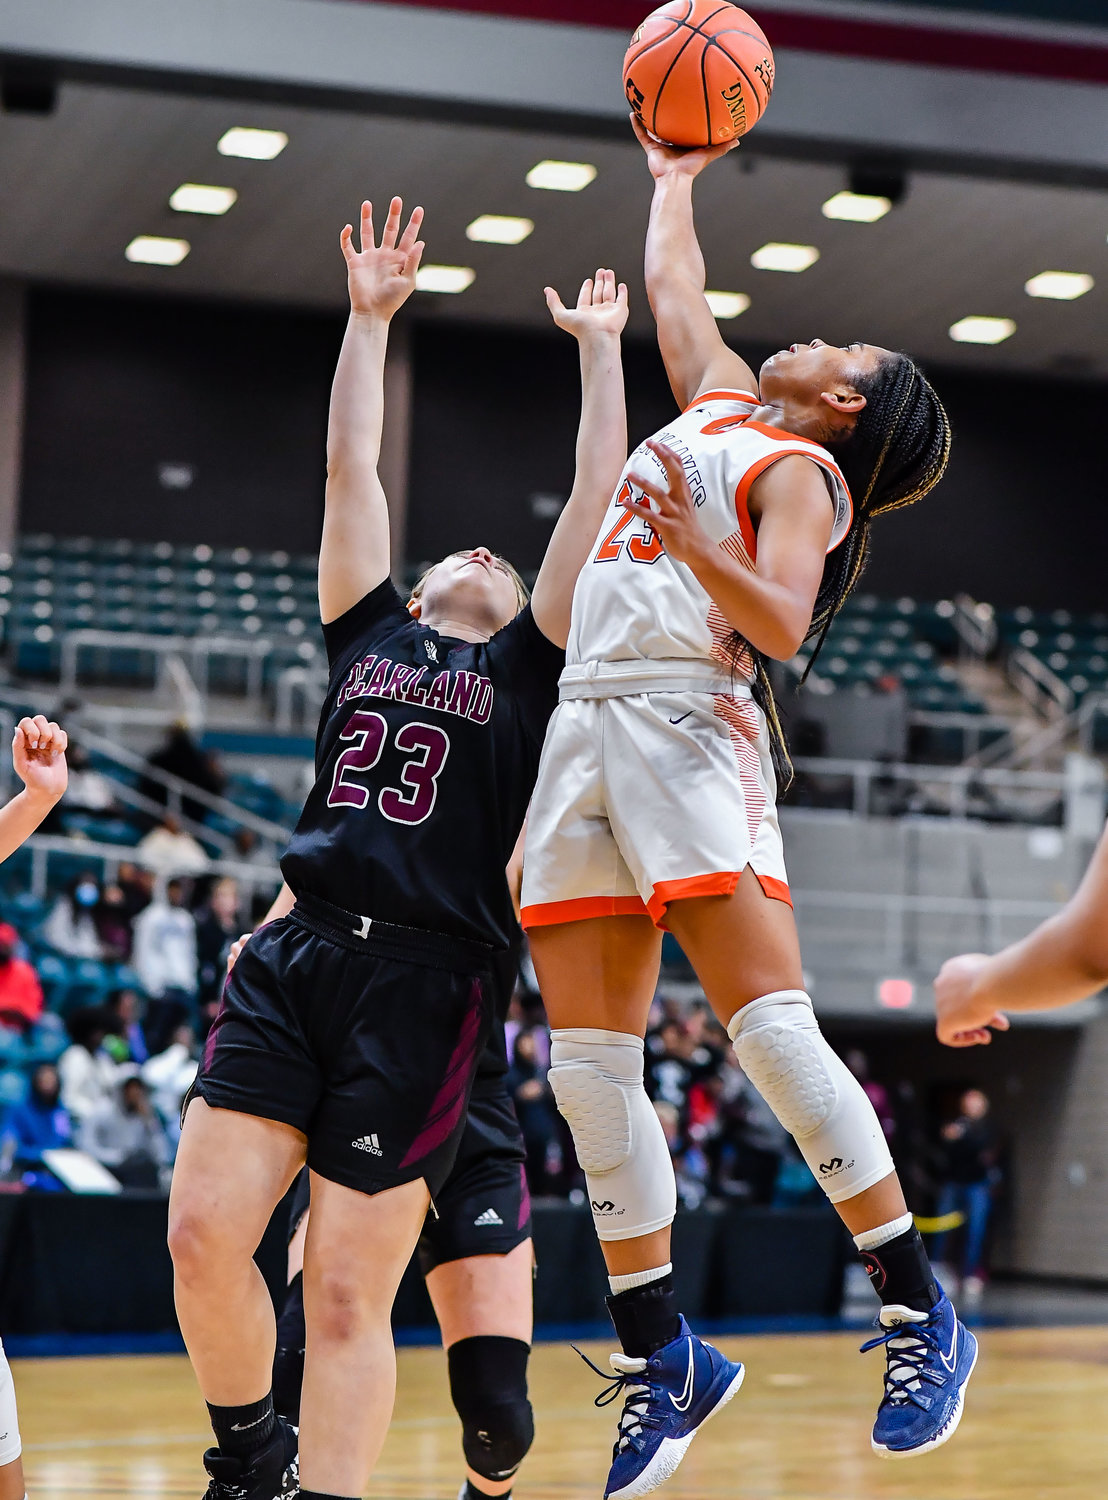 Katy Tx. Feb 25, 2022:  Seven Lakes Lenore Hudspeth #23 goes up for the rebound during the Regional SemiFinal playoff game, Seven Lakes vs Pearland at the Merrell Center. (Photo by Mark Goodman / Katy Times)